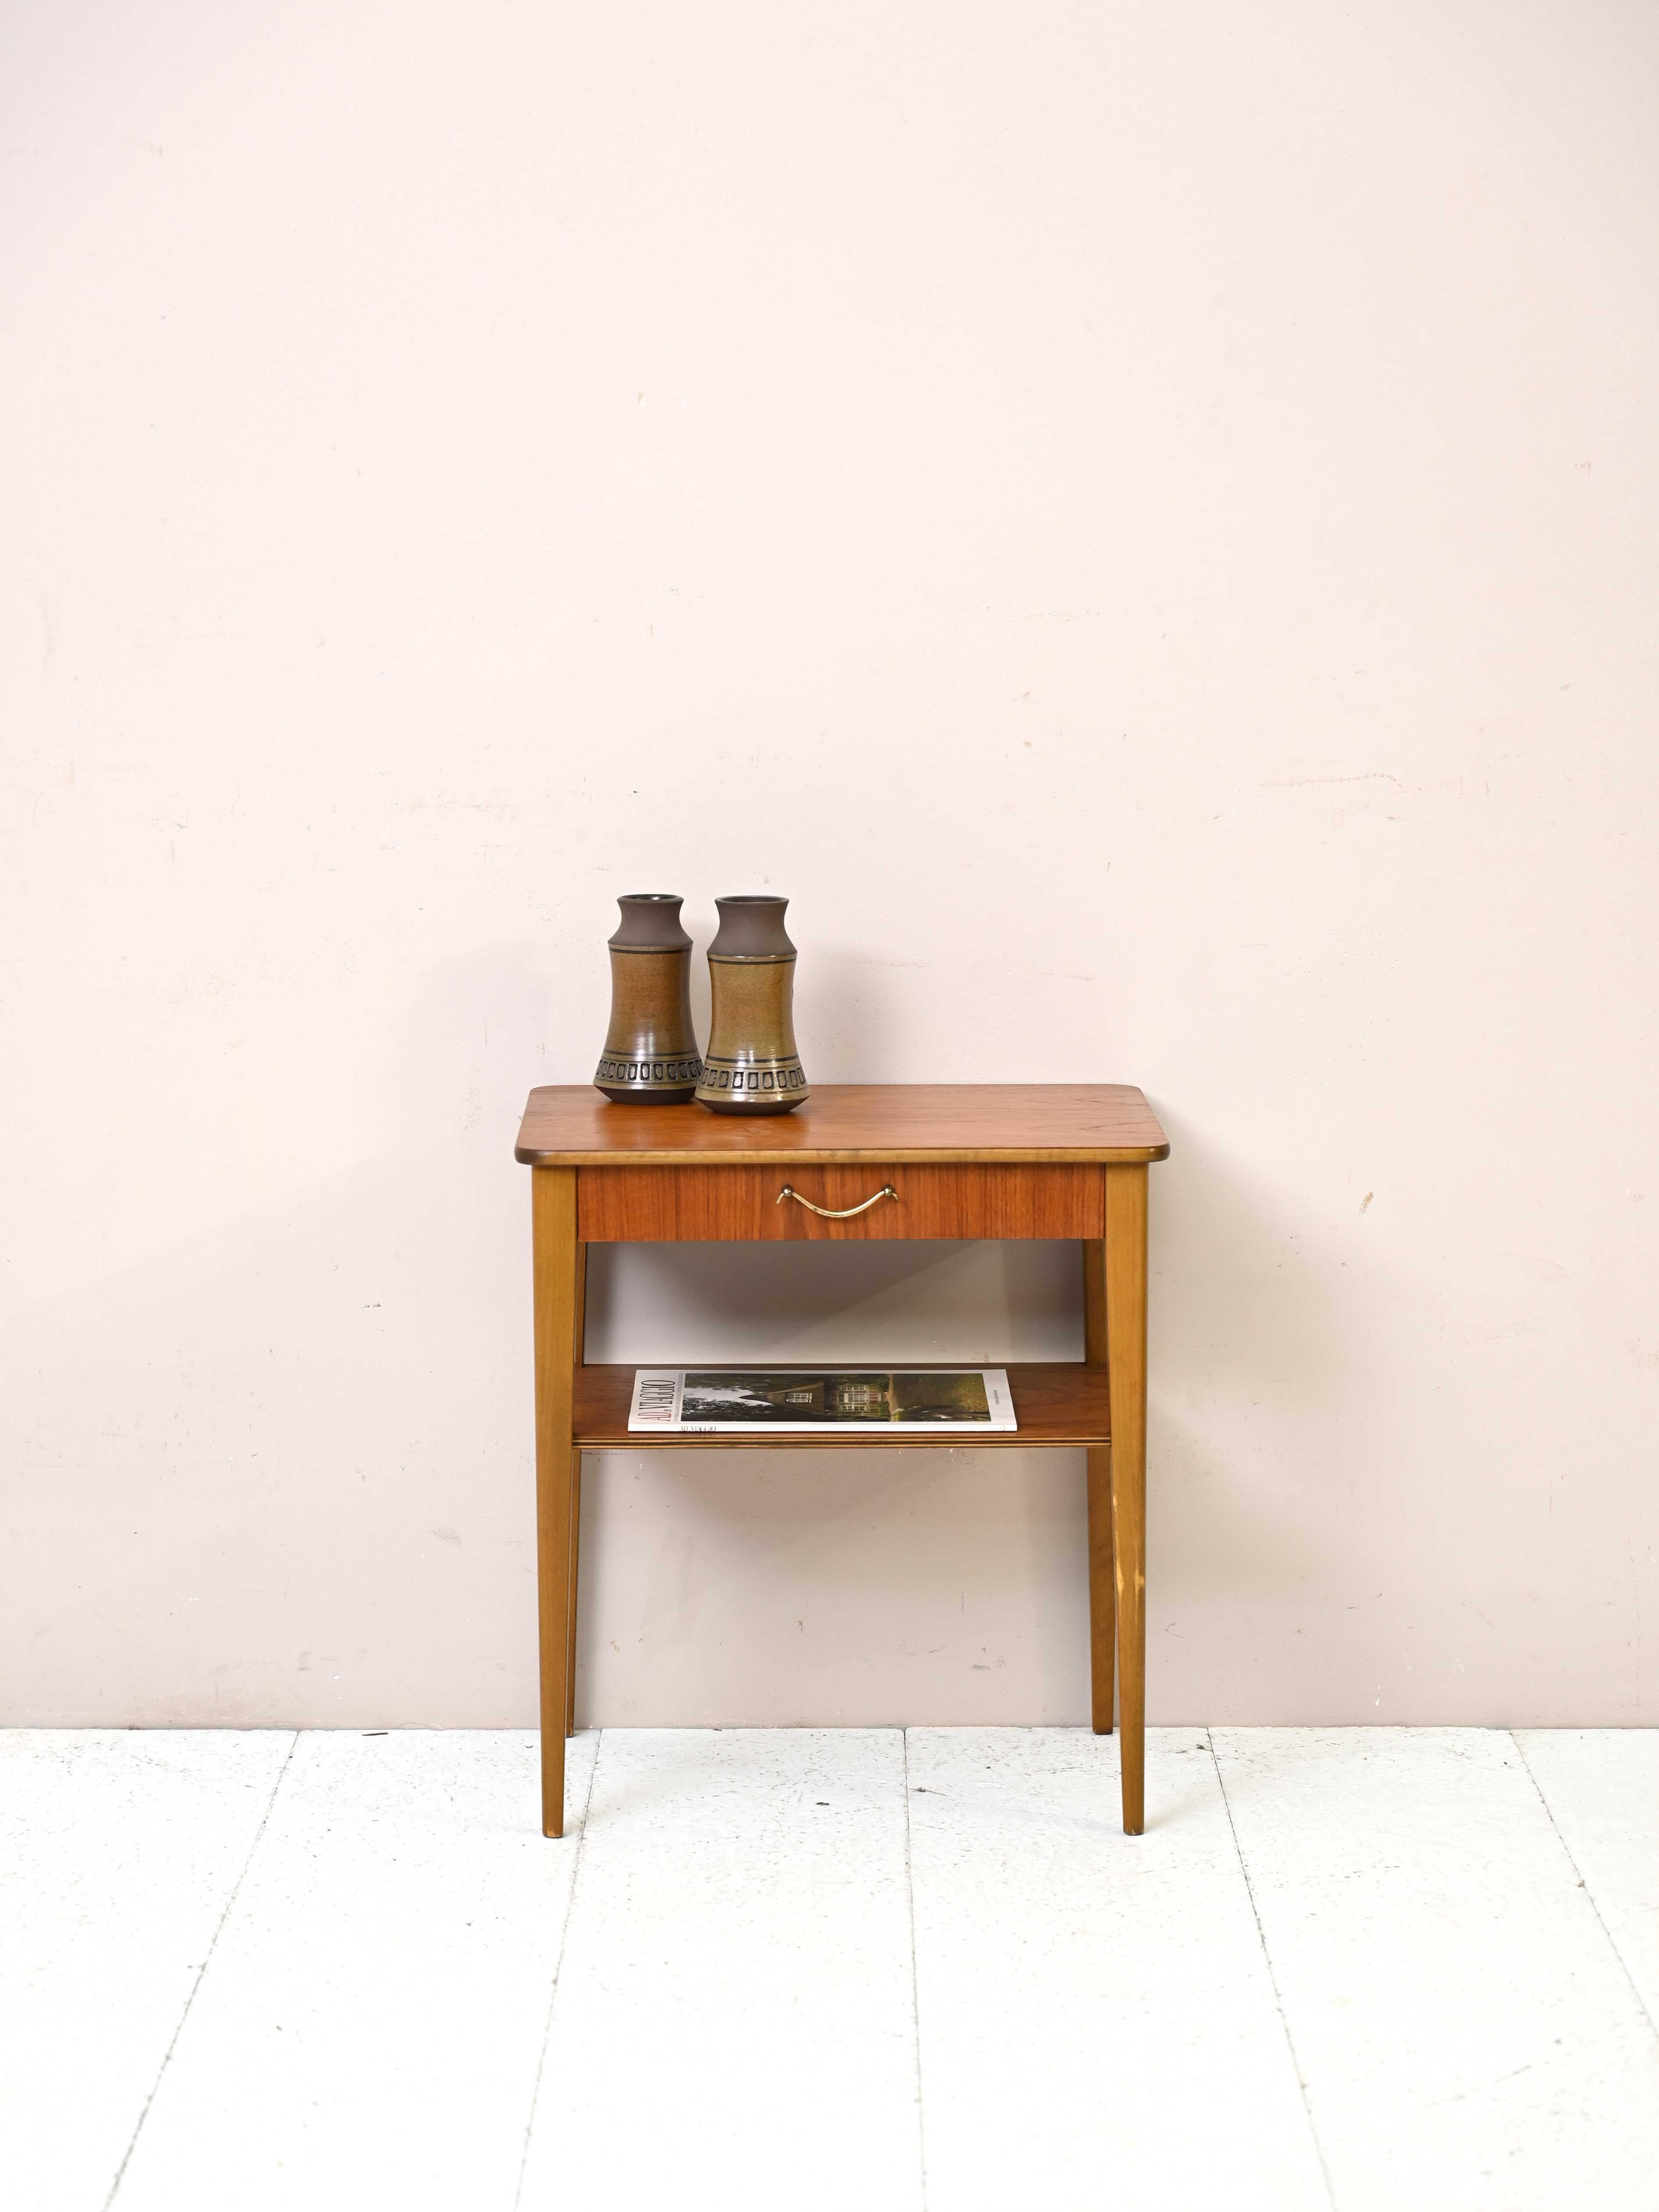 Scandinavian 1960s nightstand with metal handle.

A bedside table with the classic beauty of midcentury design.
The top with beveled corners is teak wood as is the drawer and magazine rack top. 
The tapered legs are made of birch.
The gilt